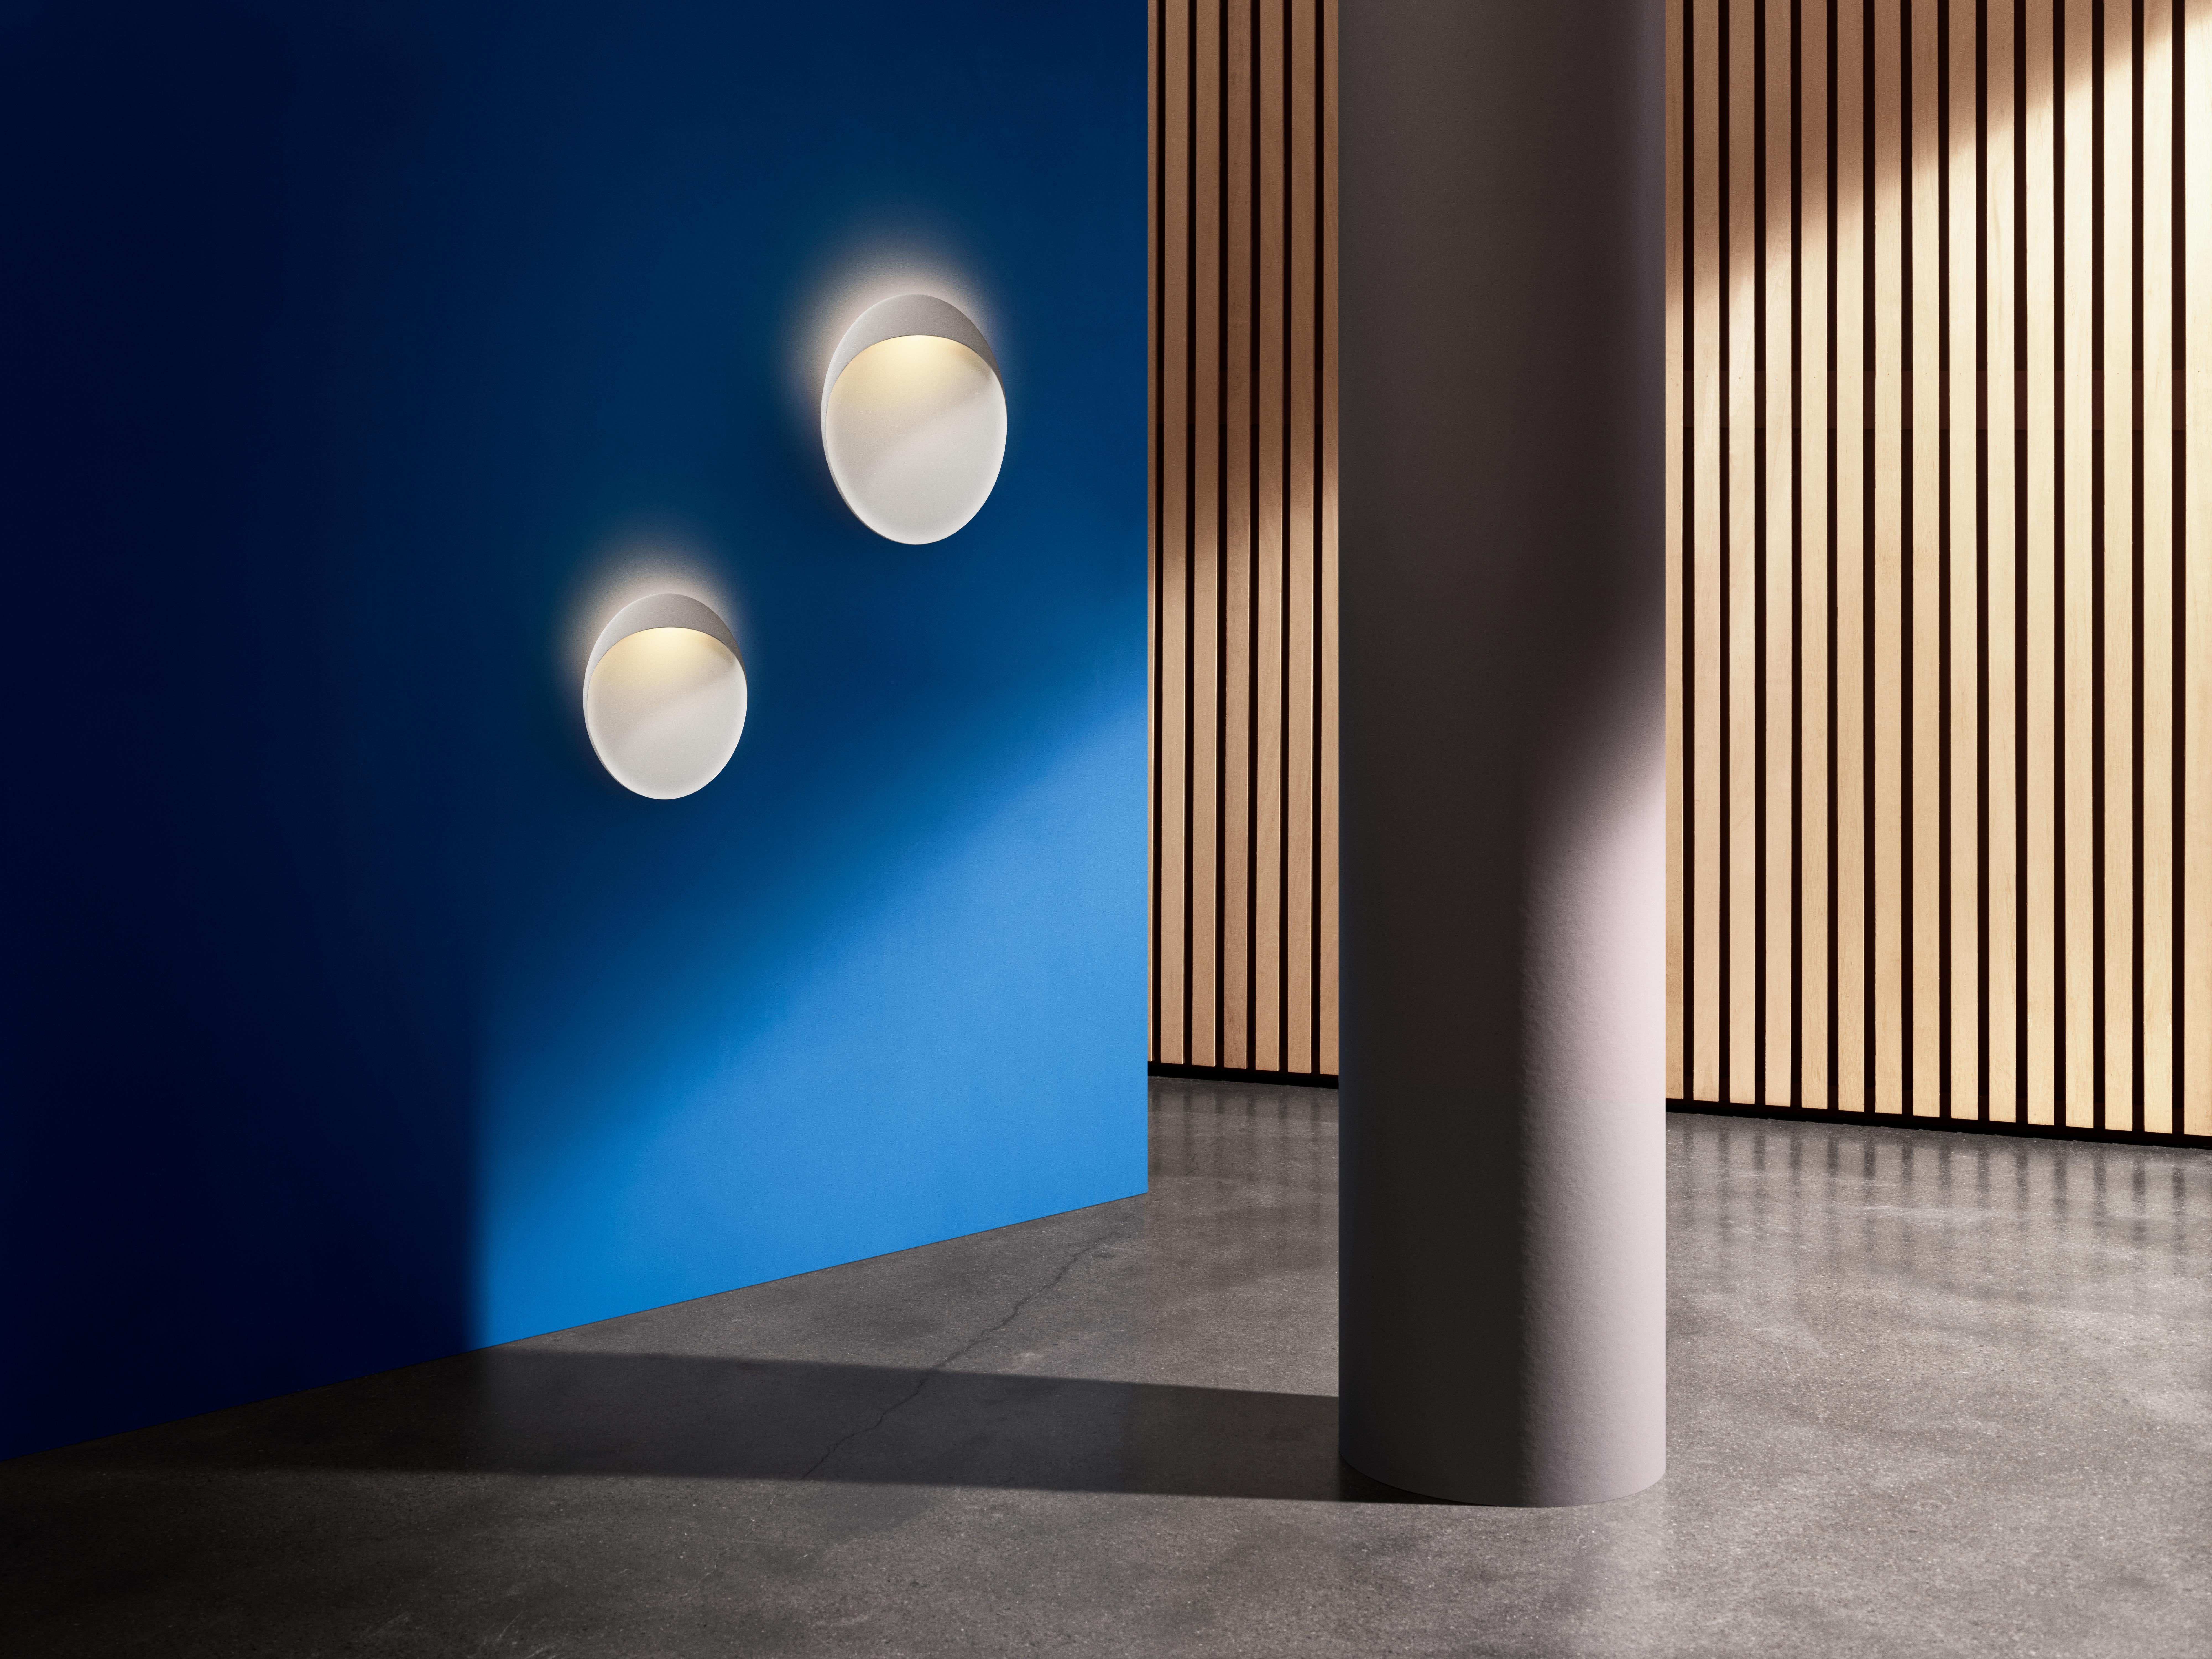 Large 'Flindt' Indoor or Outdoor Wall Light in White for Louis Poulsen.

A circular, wall-mounted fixture that brings bold, sculptural illumination to both indoor and outdoor spaces. The slim, elliptical lamp has a floating appearance that, paired